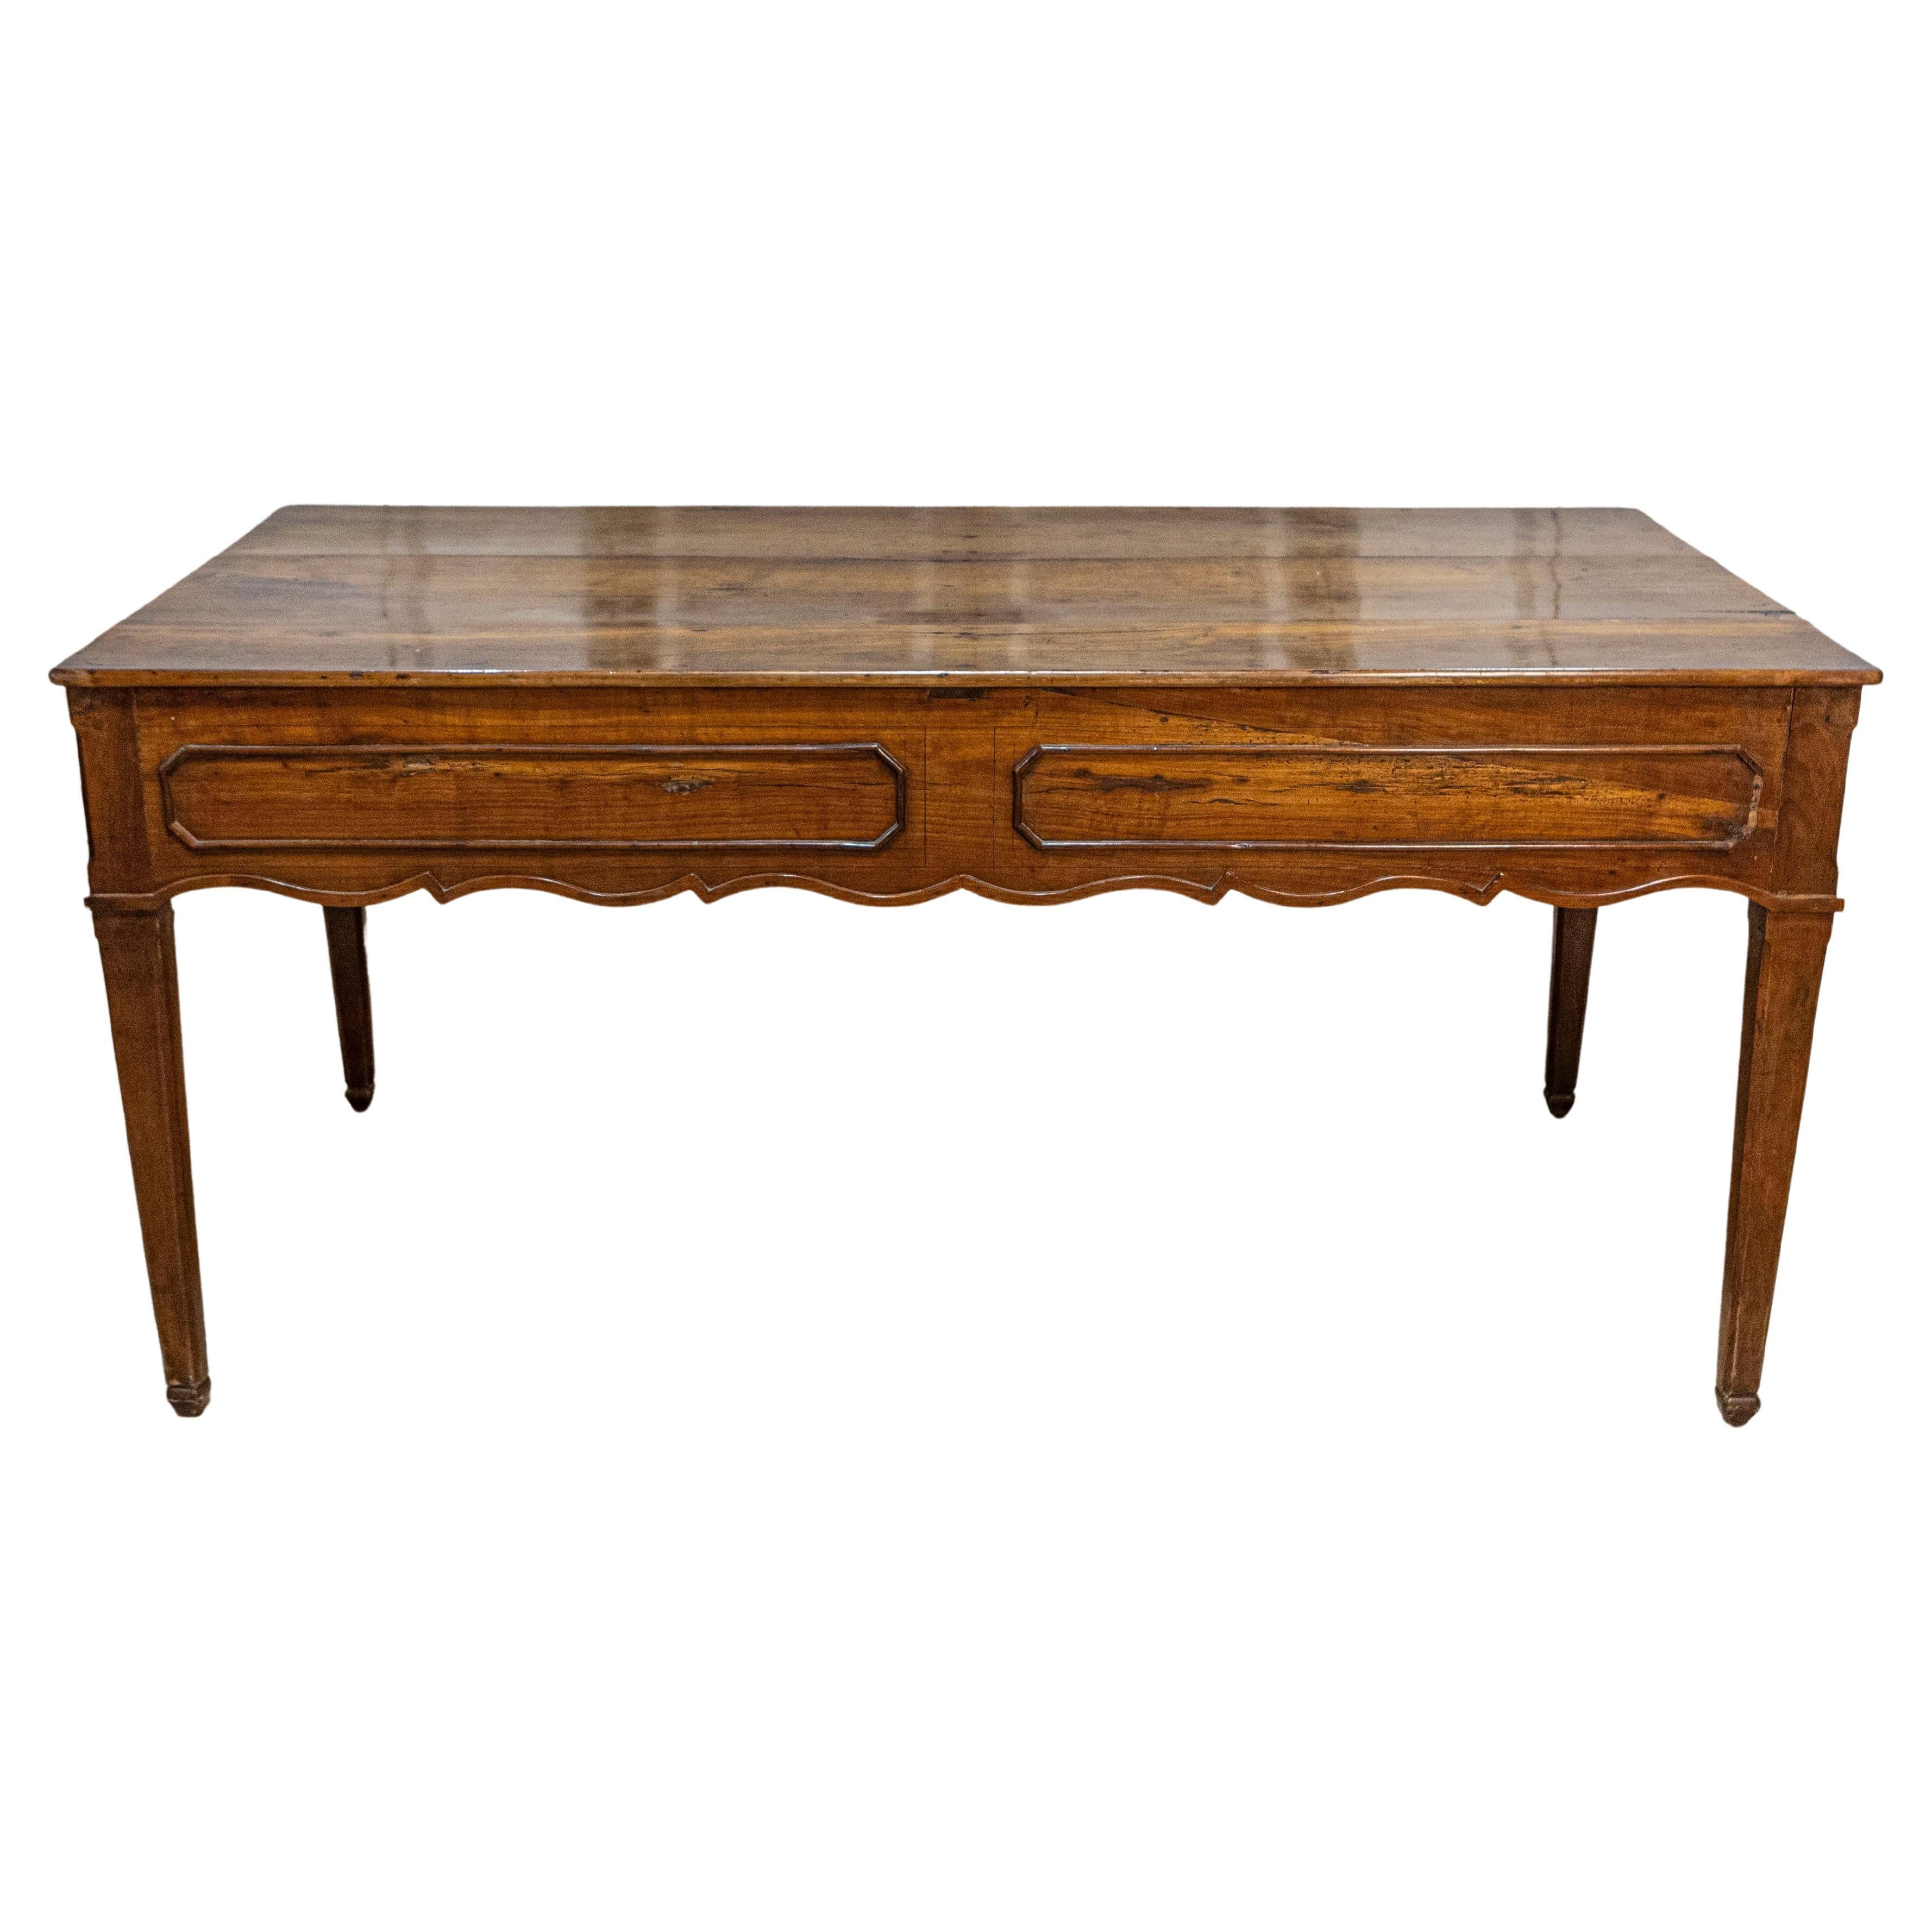 French 19th Century Walnut Desk with Carved Apron and Lateral Drawer For Sale